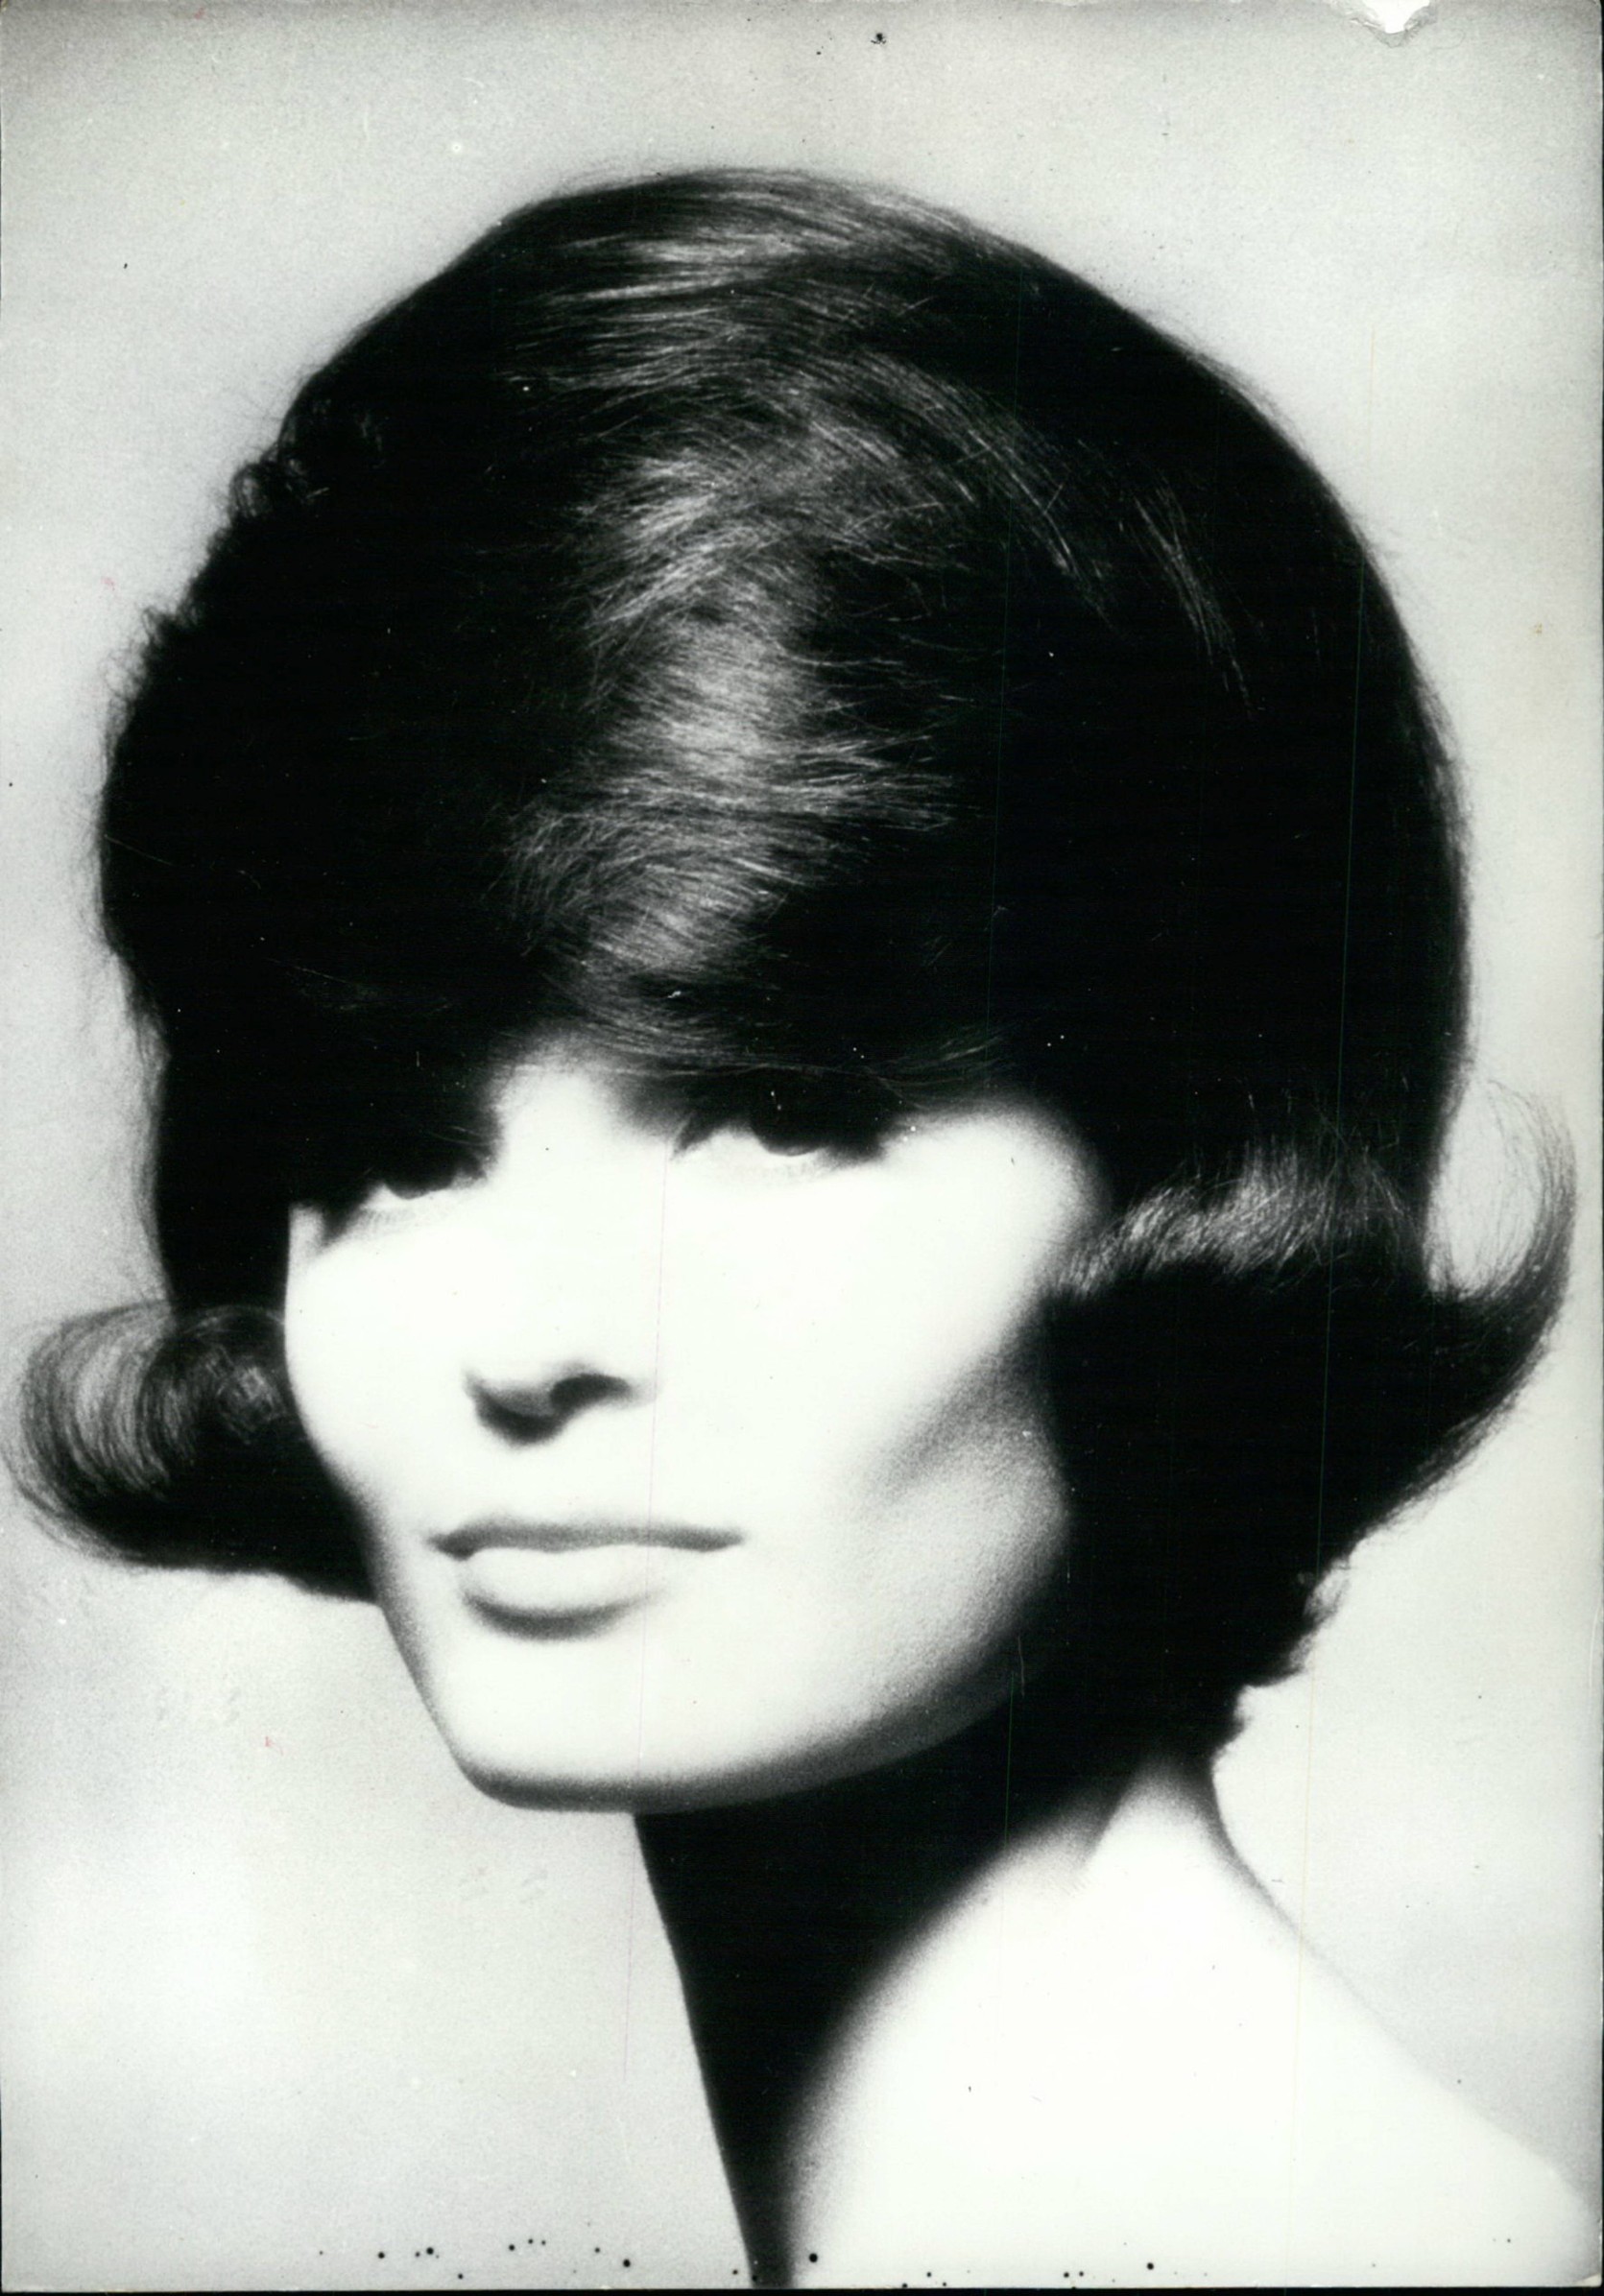 Apr. 04, 1961 - Hairdress for Jacqueline Kennedy: Paris Hairdresser Jacques Dessange has designed this hairdress on the occasion of the forthcoming visit to Paris of Washington's first lady. A Mannequin Resembling Jacqueline Kennedy is modelling it., Image: 209882750, License: Rights-managed, Restrictions: , Model Release: no, Credit line: Keystone Pictures USA / Zuma Press / Profimedia